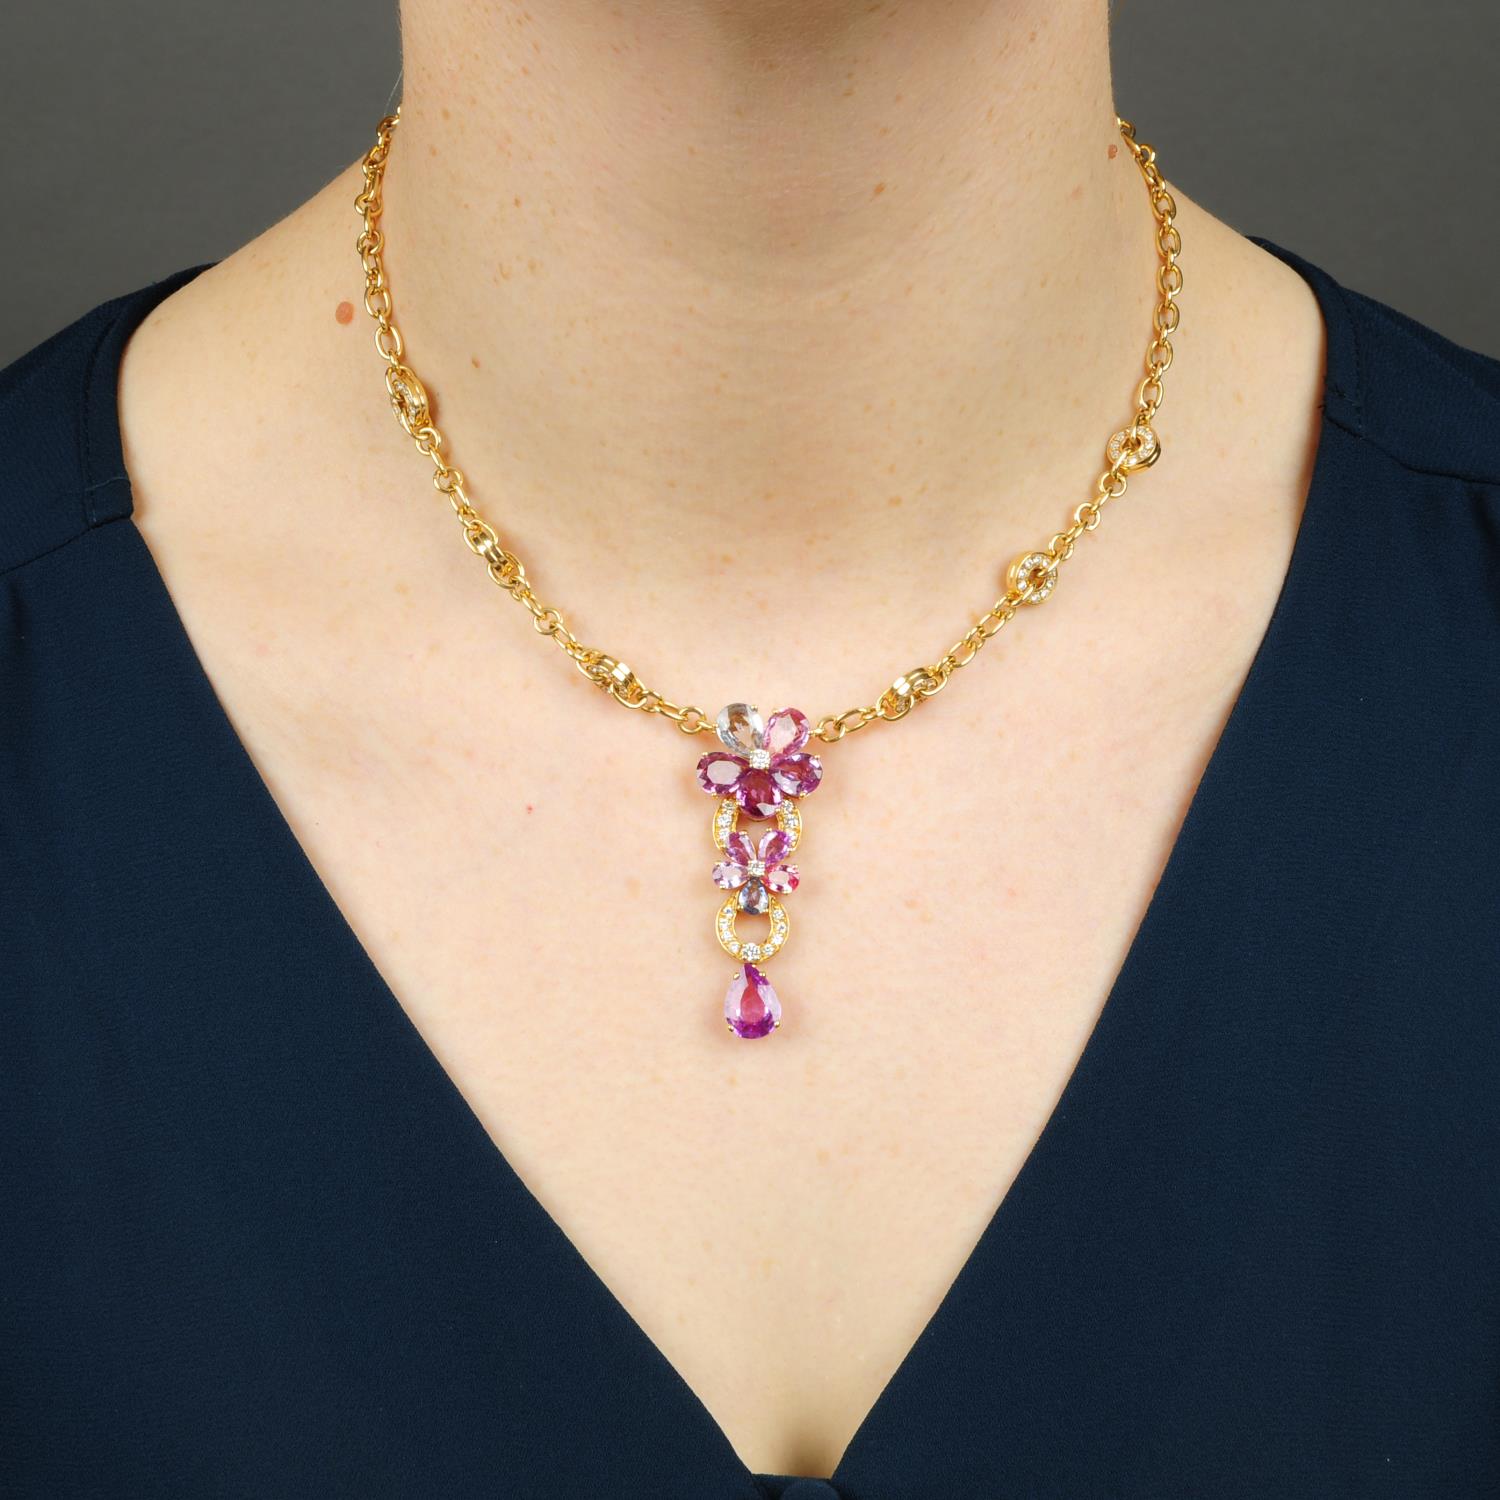 A limited edition diamond and vari-hue 'Sapphire Flower' necklace, - Image 3 of 5